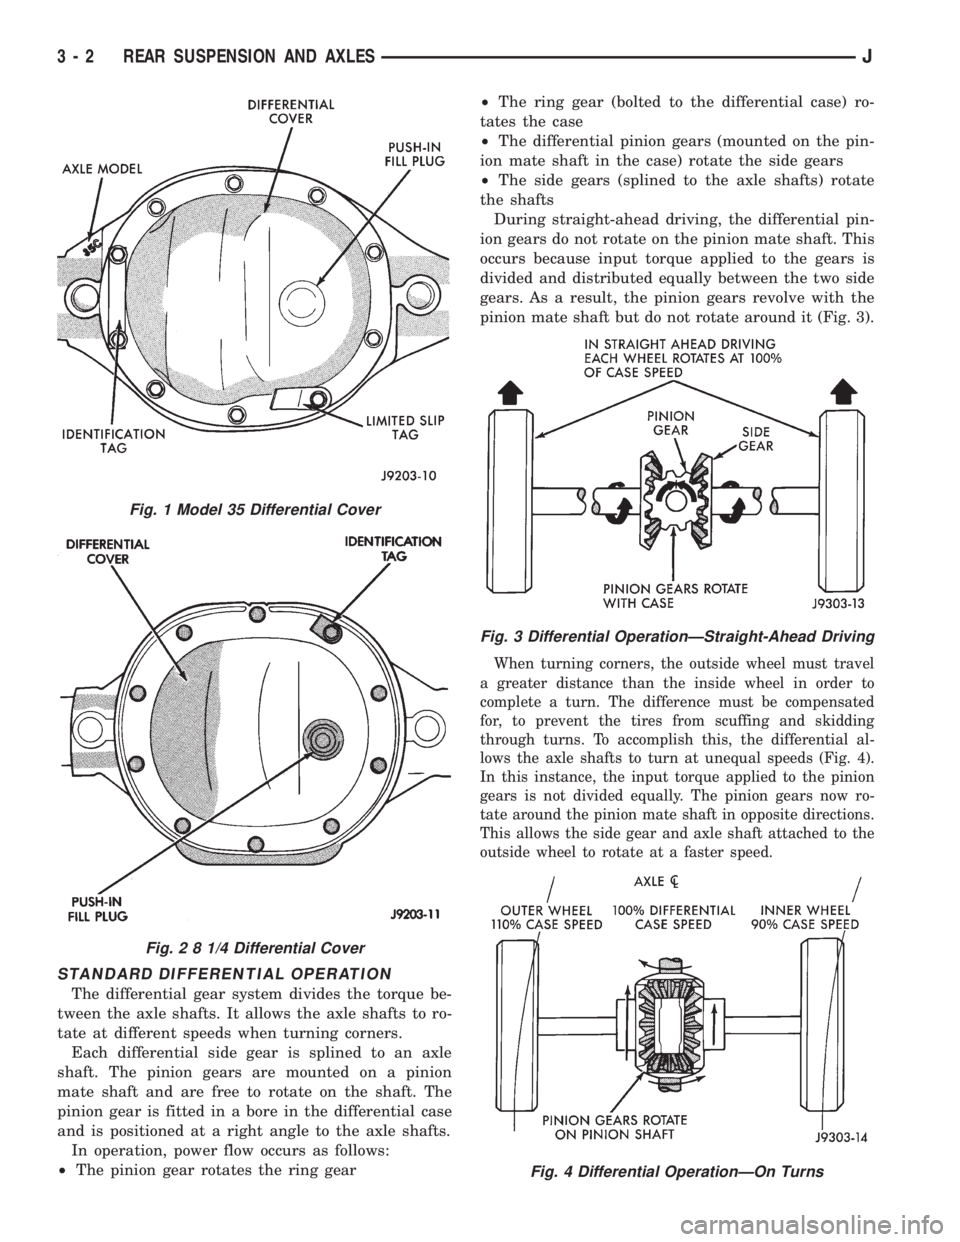 JEEP XJ 1995  Service And Repair Manual STANDARD DIFFERENTIAL OPERATION
The differential gear system divides the torque be-
tween the axle shafts. It allows the axle shafts to ro-
tate at different speeds when turning corners.
Each differen